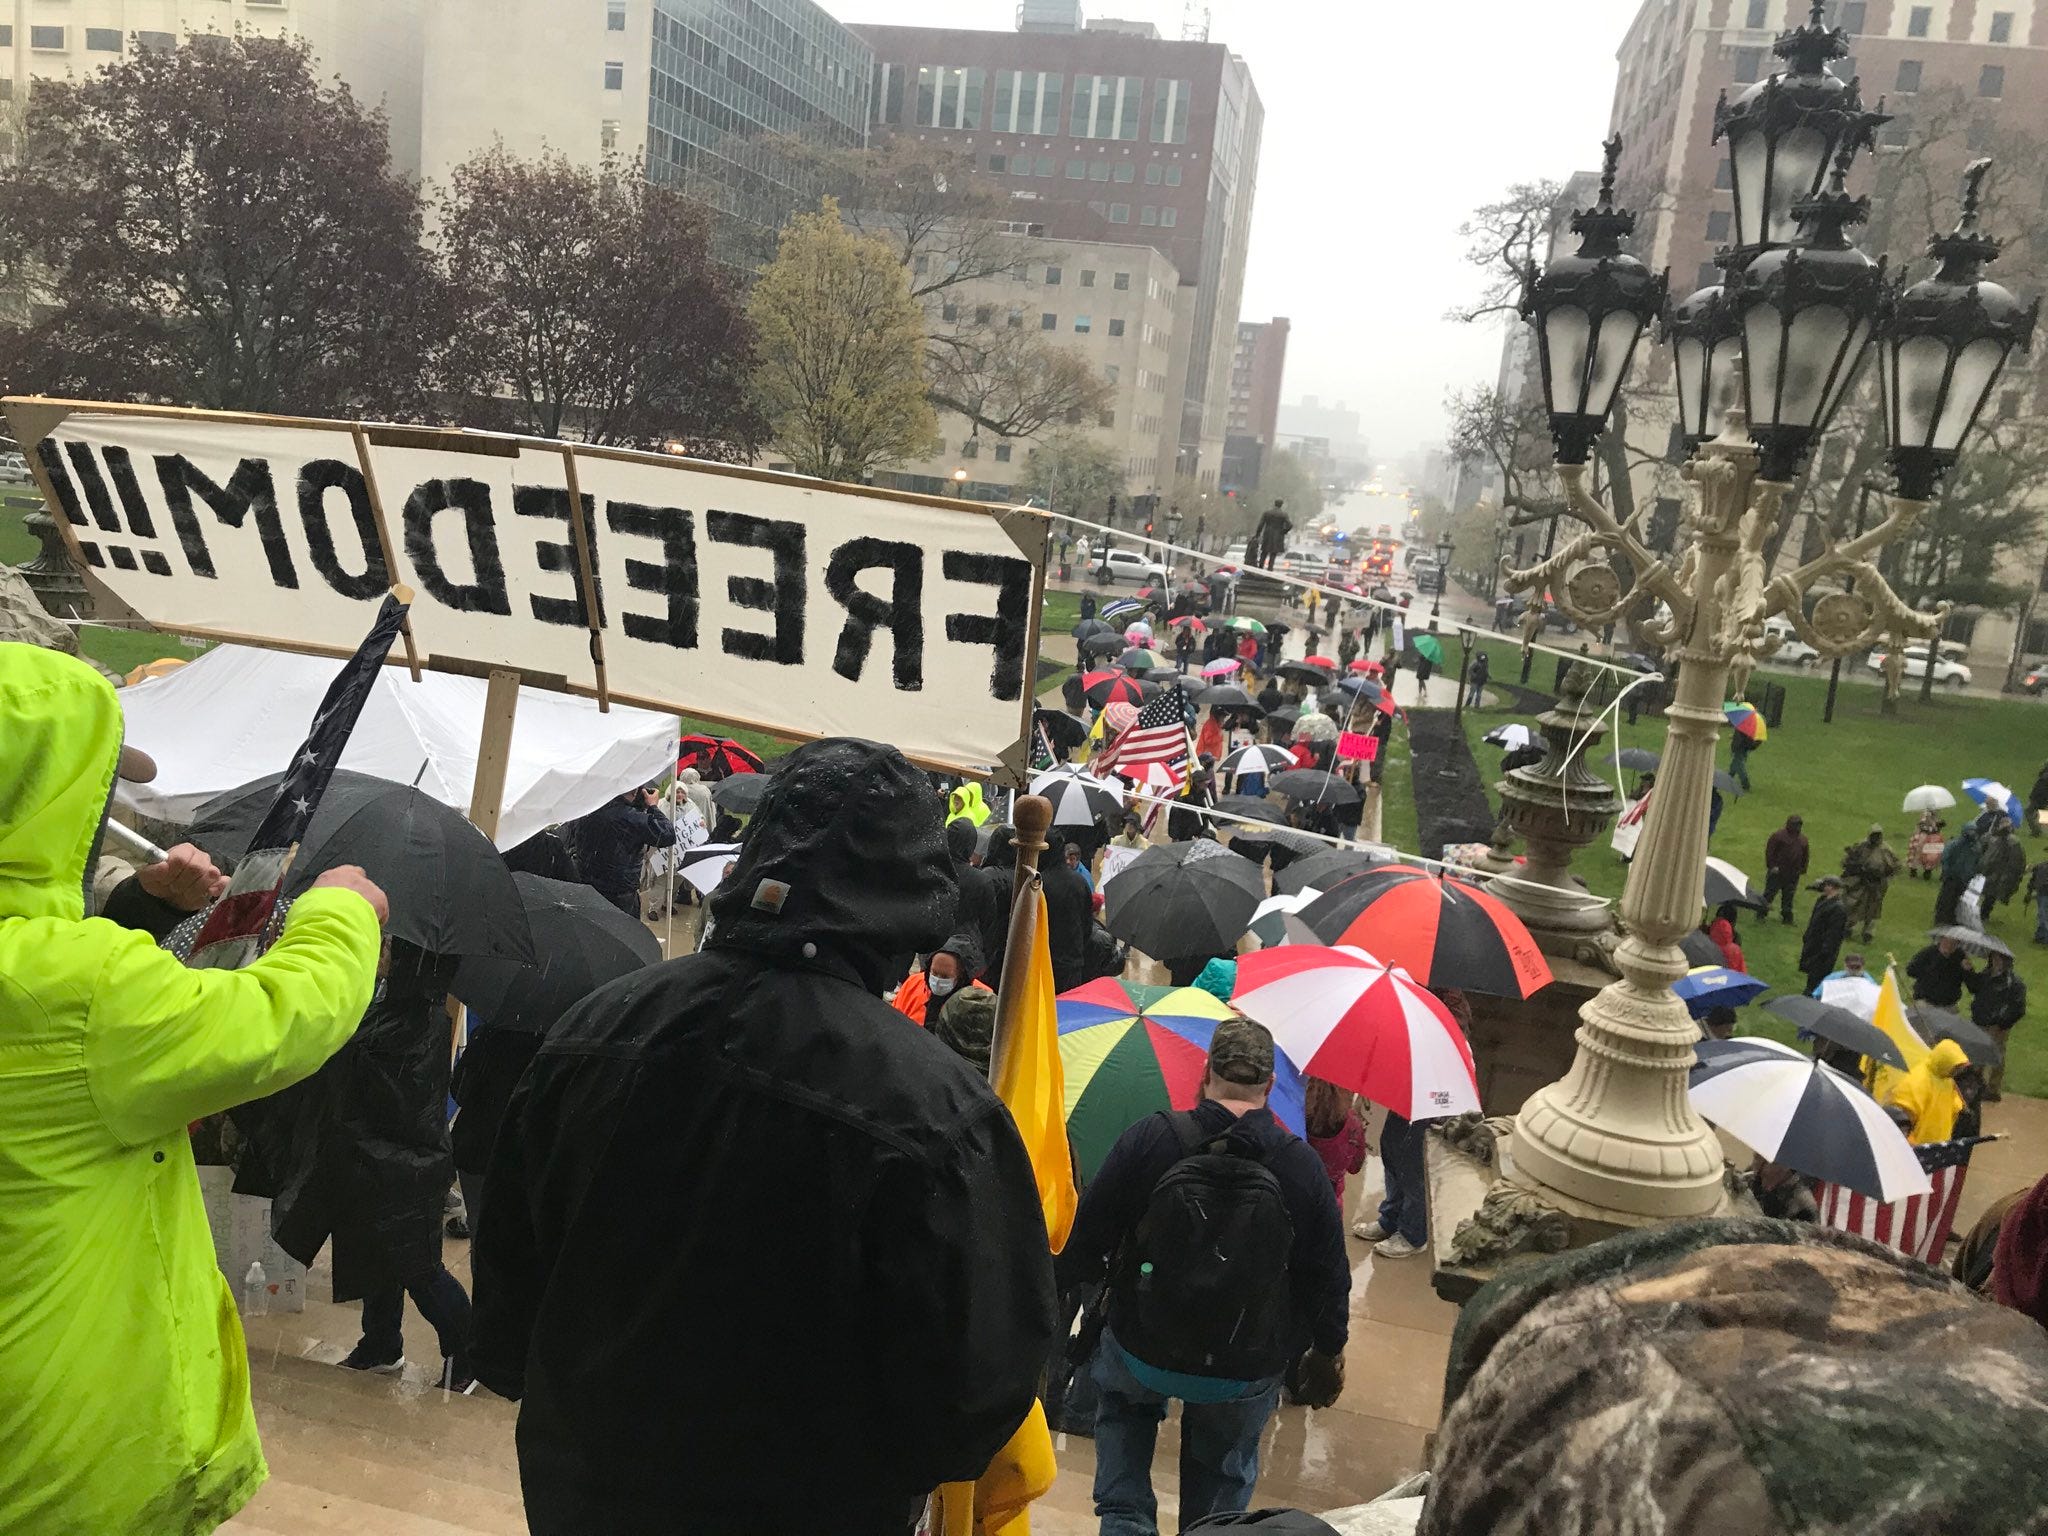 Protesters at the Michigan State Capitol building.